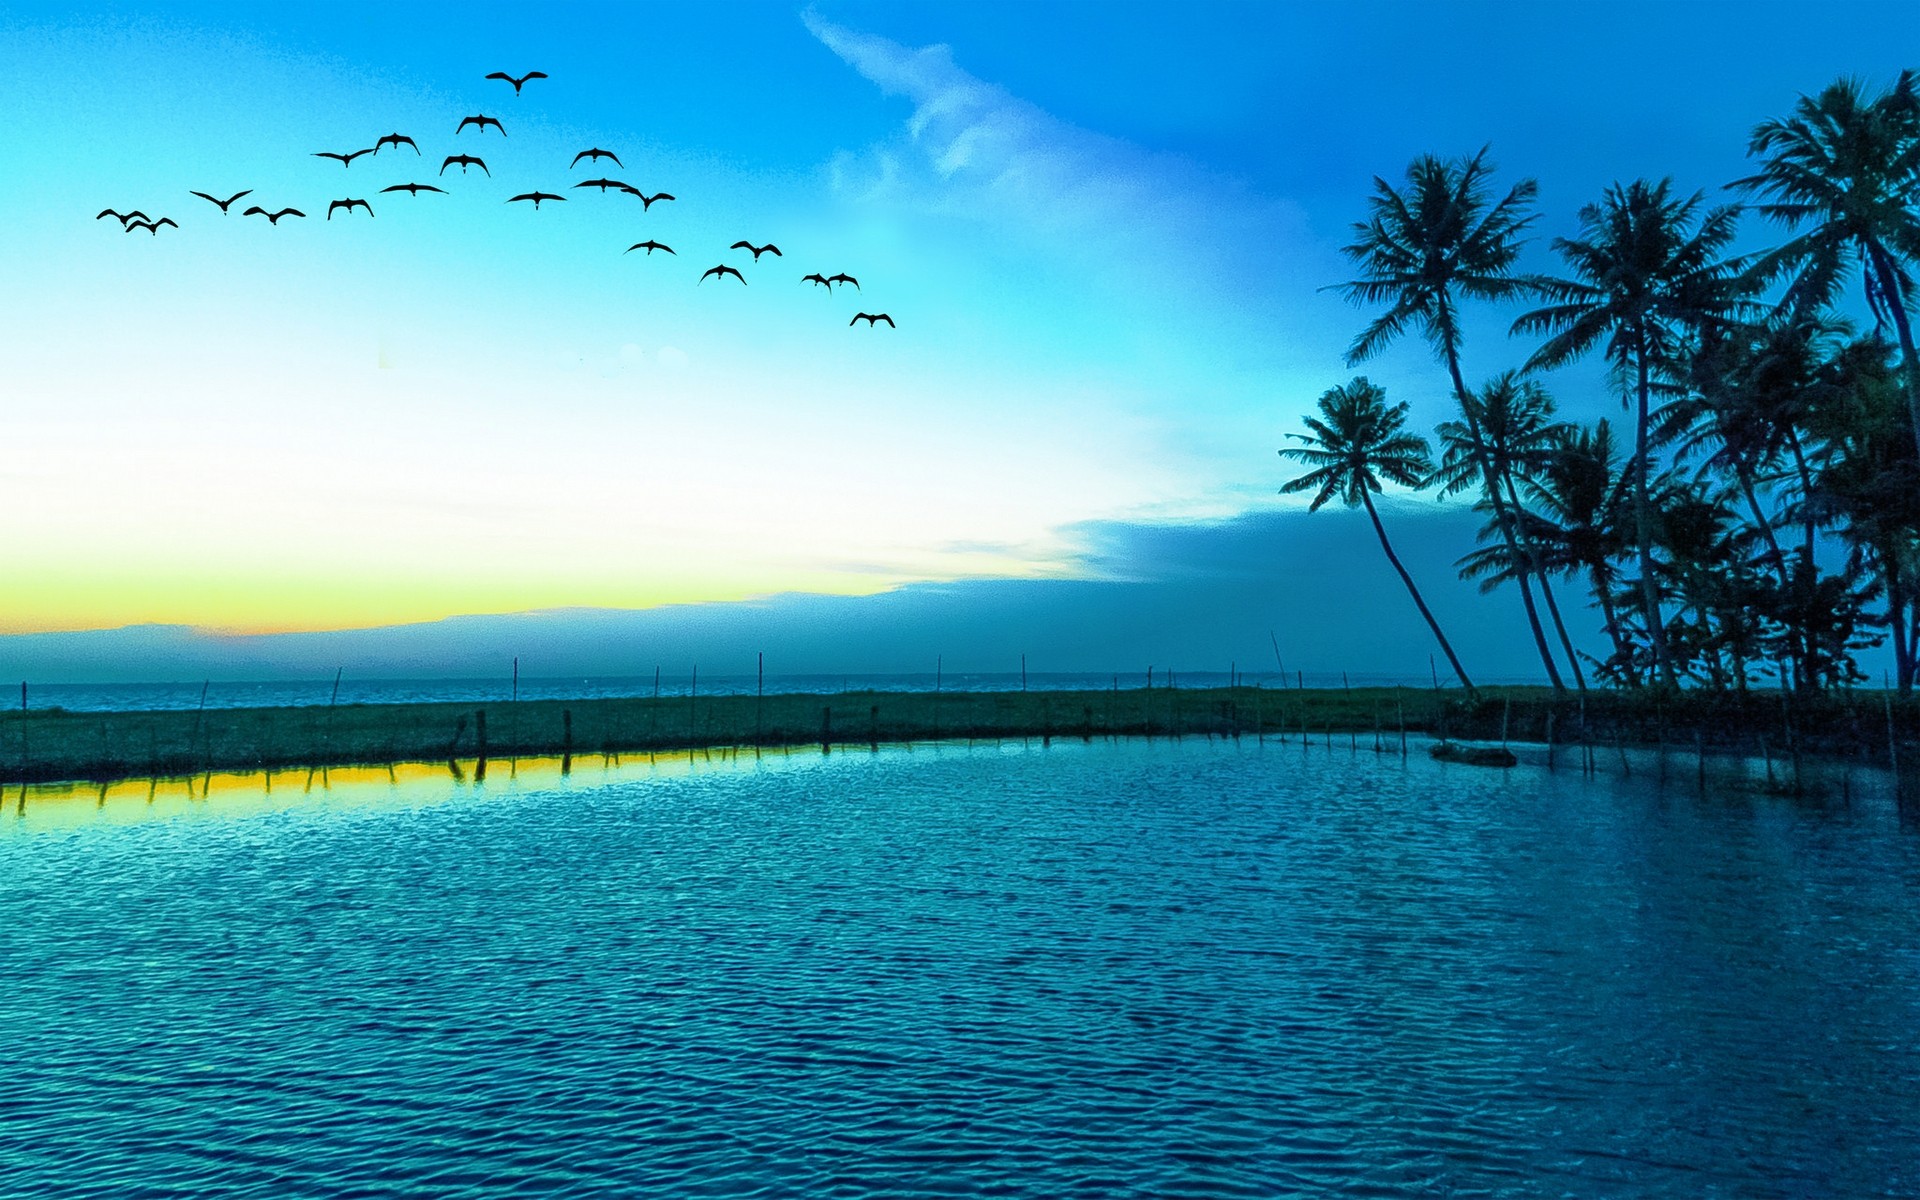 General 1920x1200 nature birds flying blue lake palm trees sea beach sky animals water low light